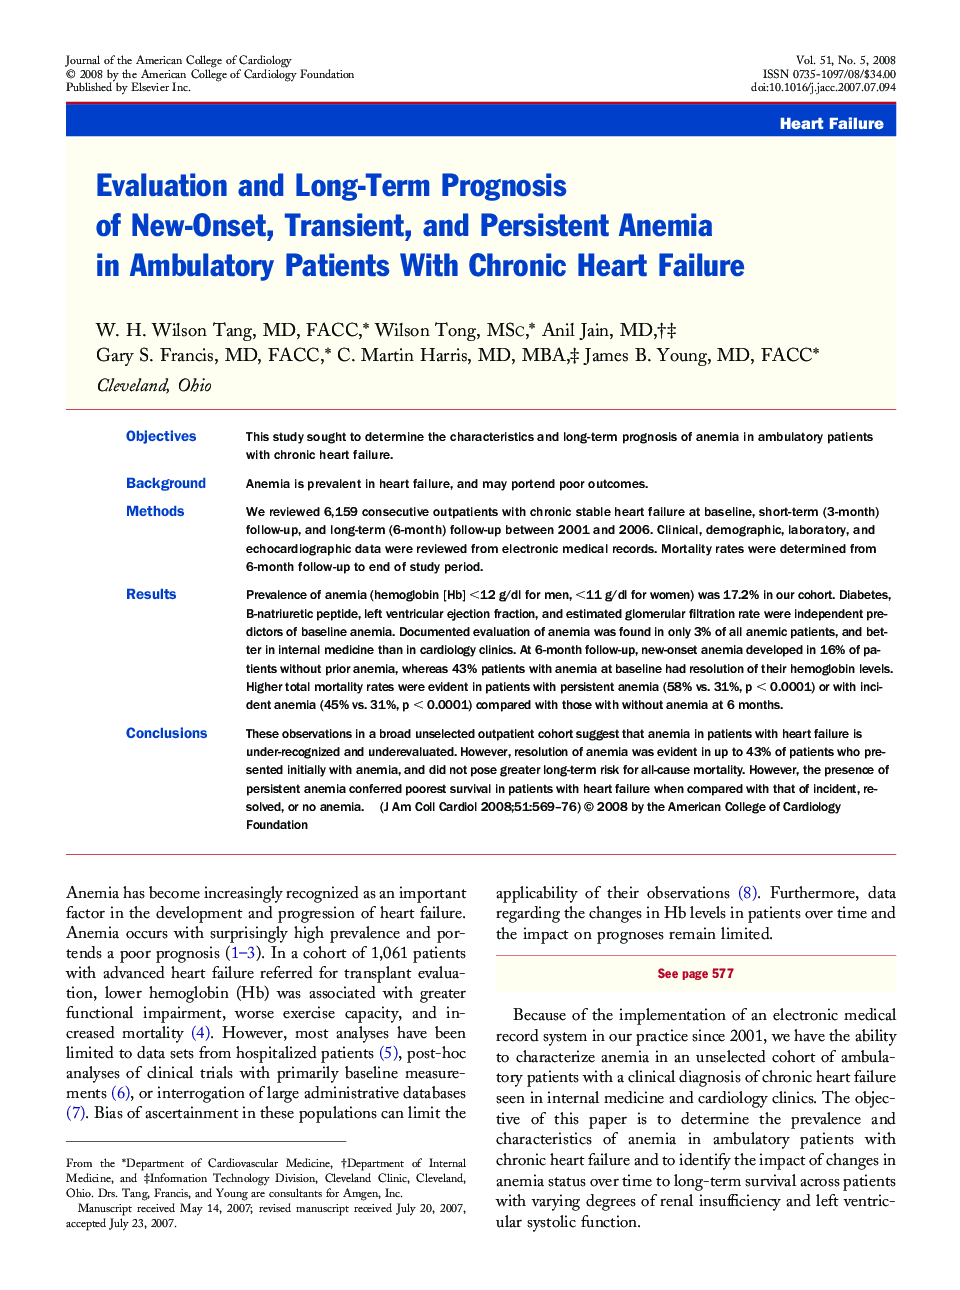 Evaluation and Long-Term Prognosis of New-Onset, Transient, and Persistent Anemia in Ambulatory Patients With Chronic Heart Failure